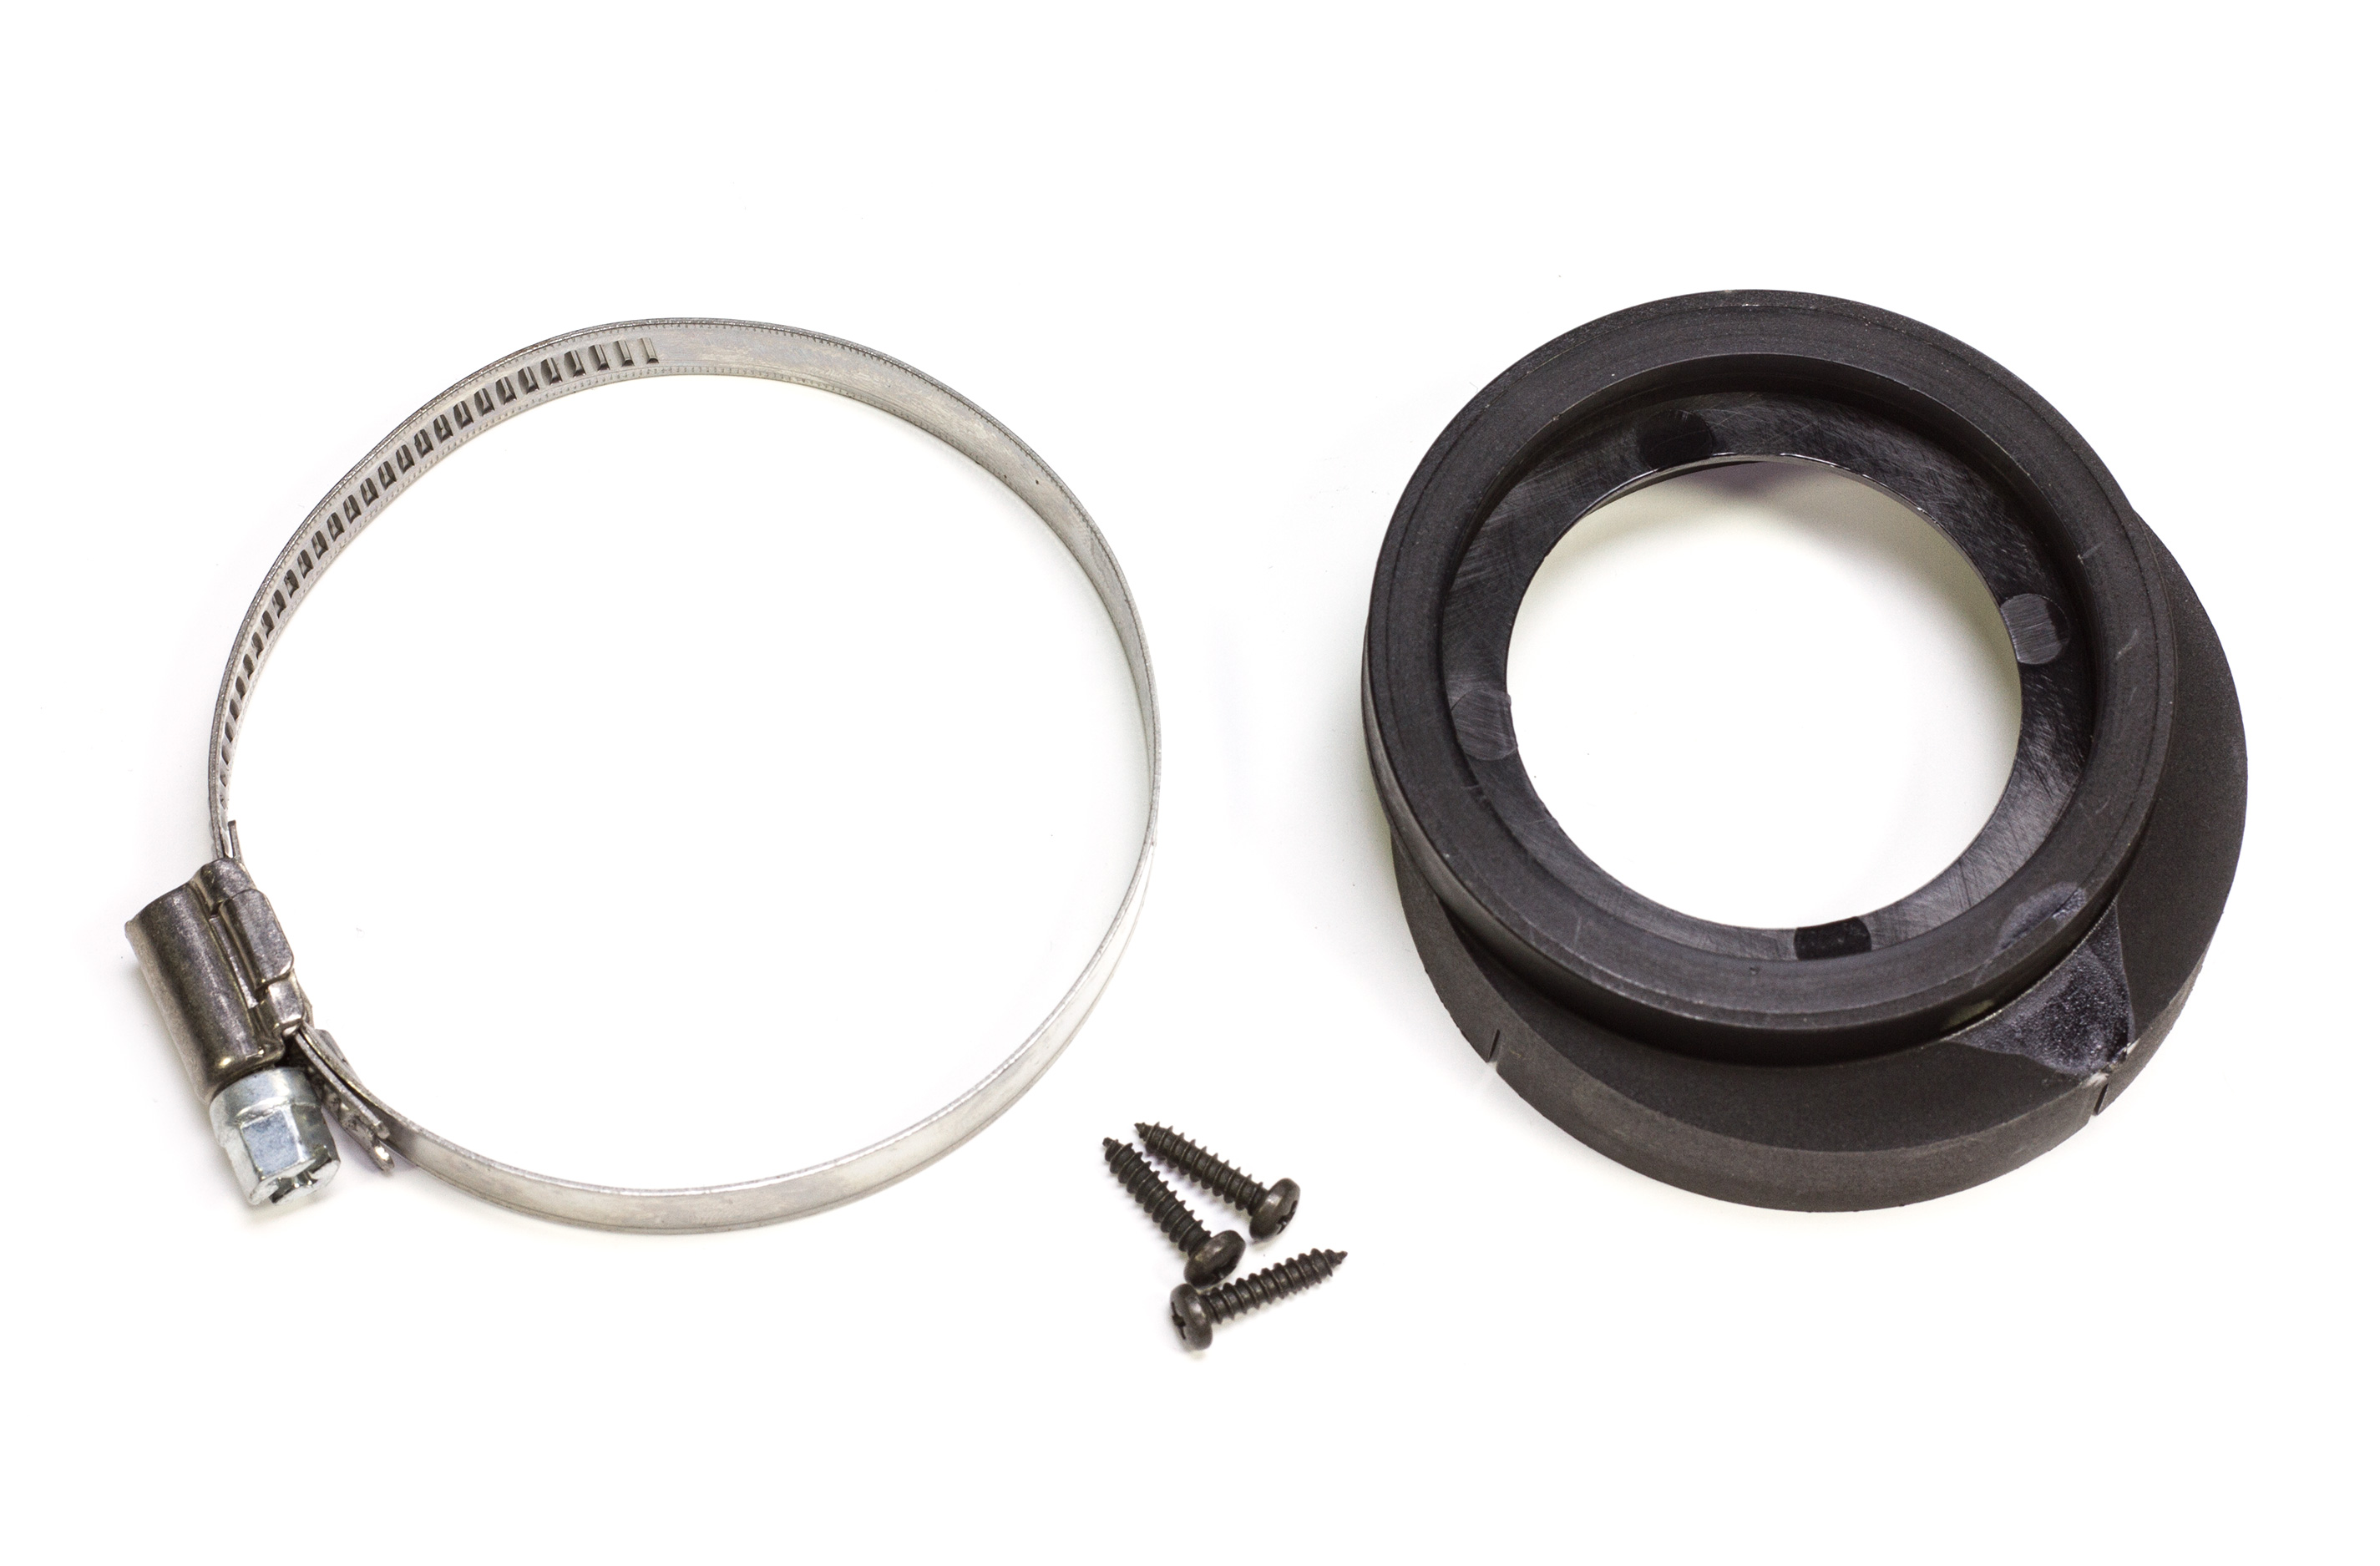 6462 FG Air filter adapter for 6460 and 6461 - 1pce.